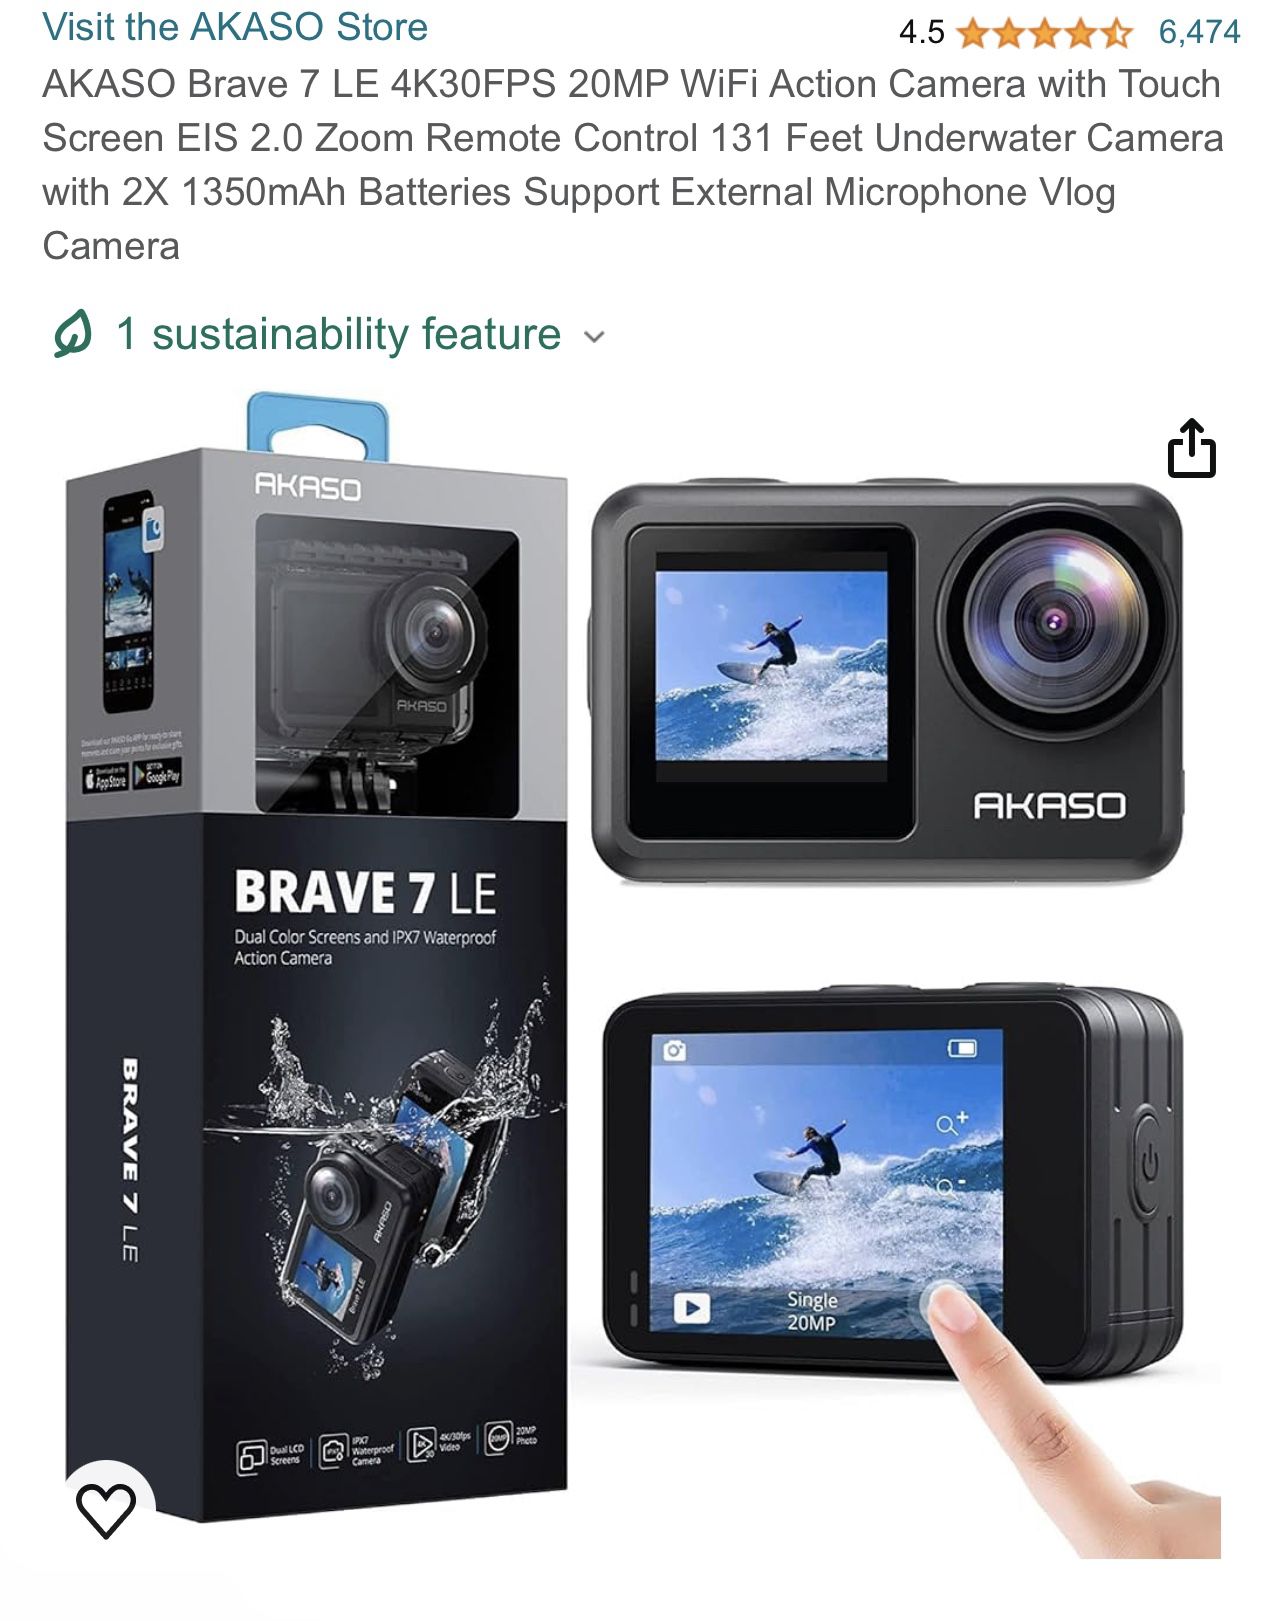 AKASO - Brave 7 LE SE 4K Waterproof Action Camera with Remote 